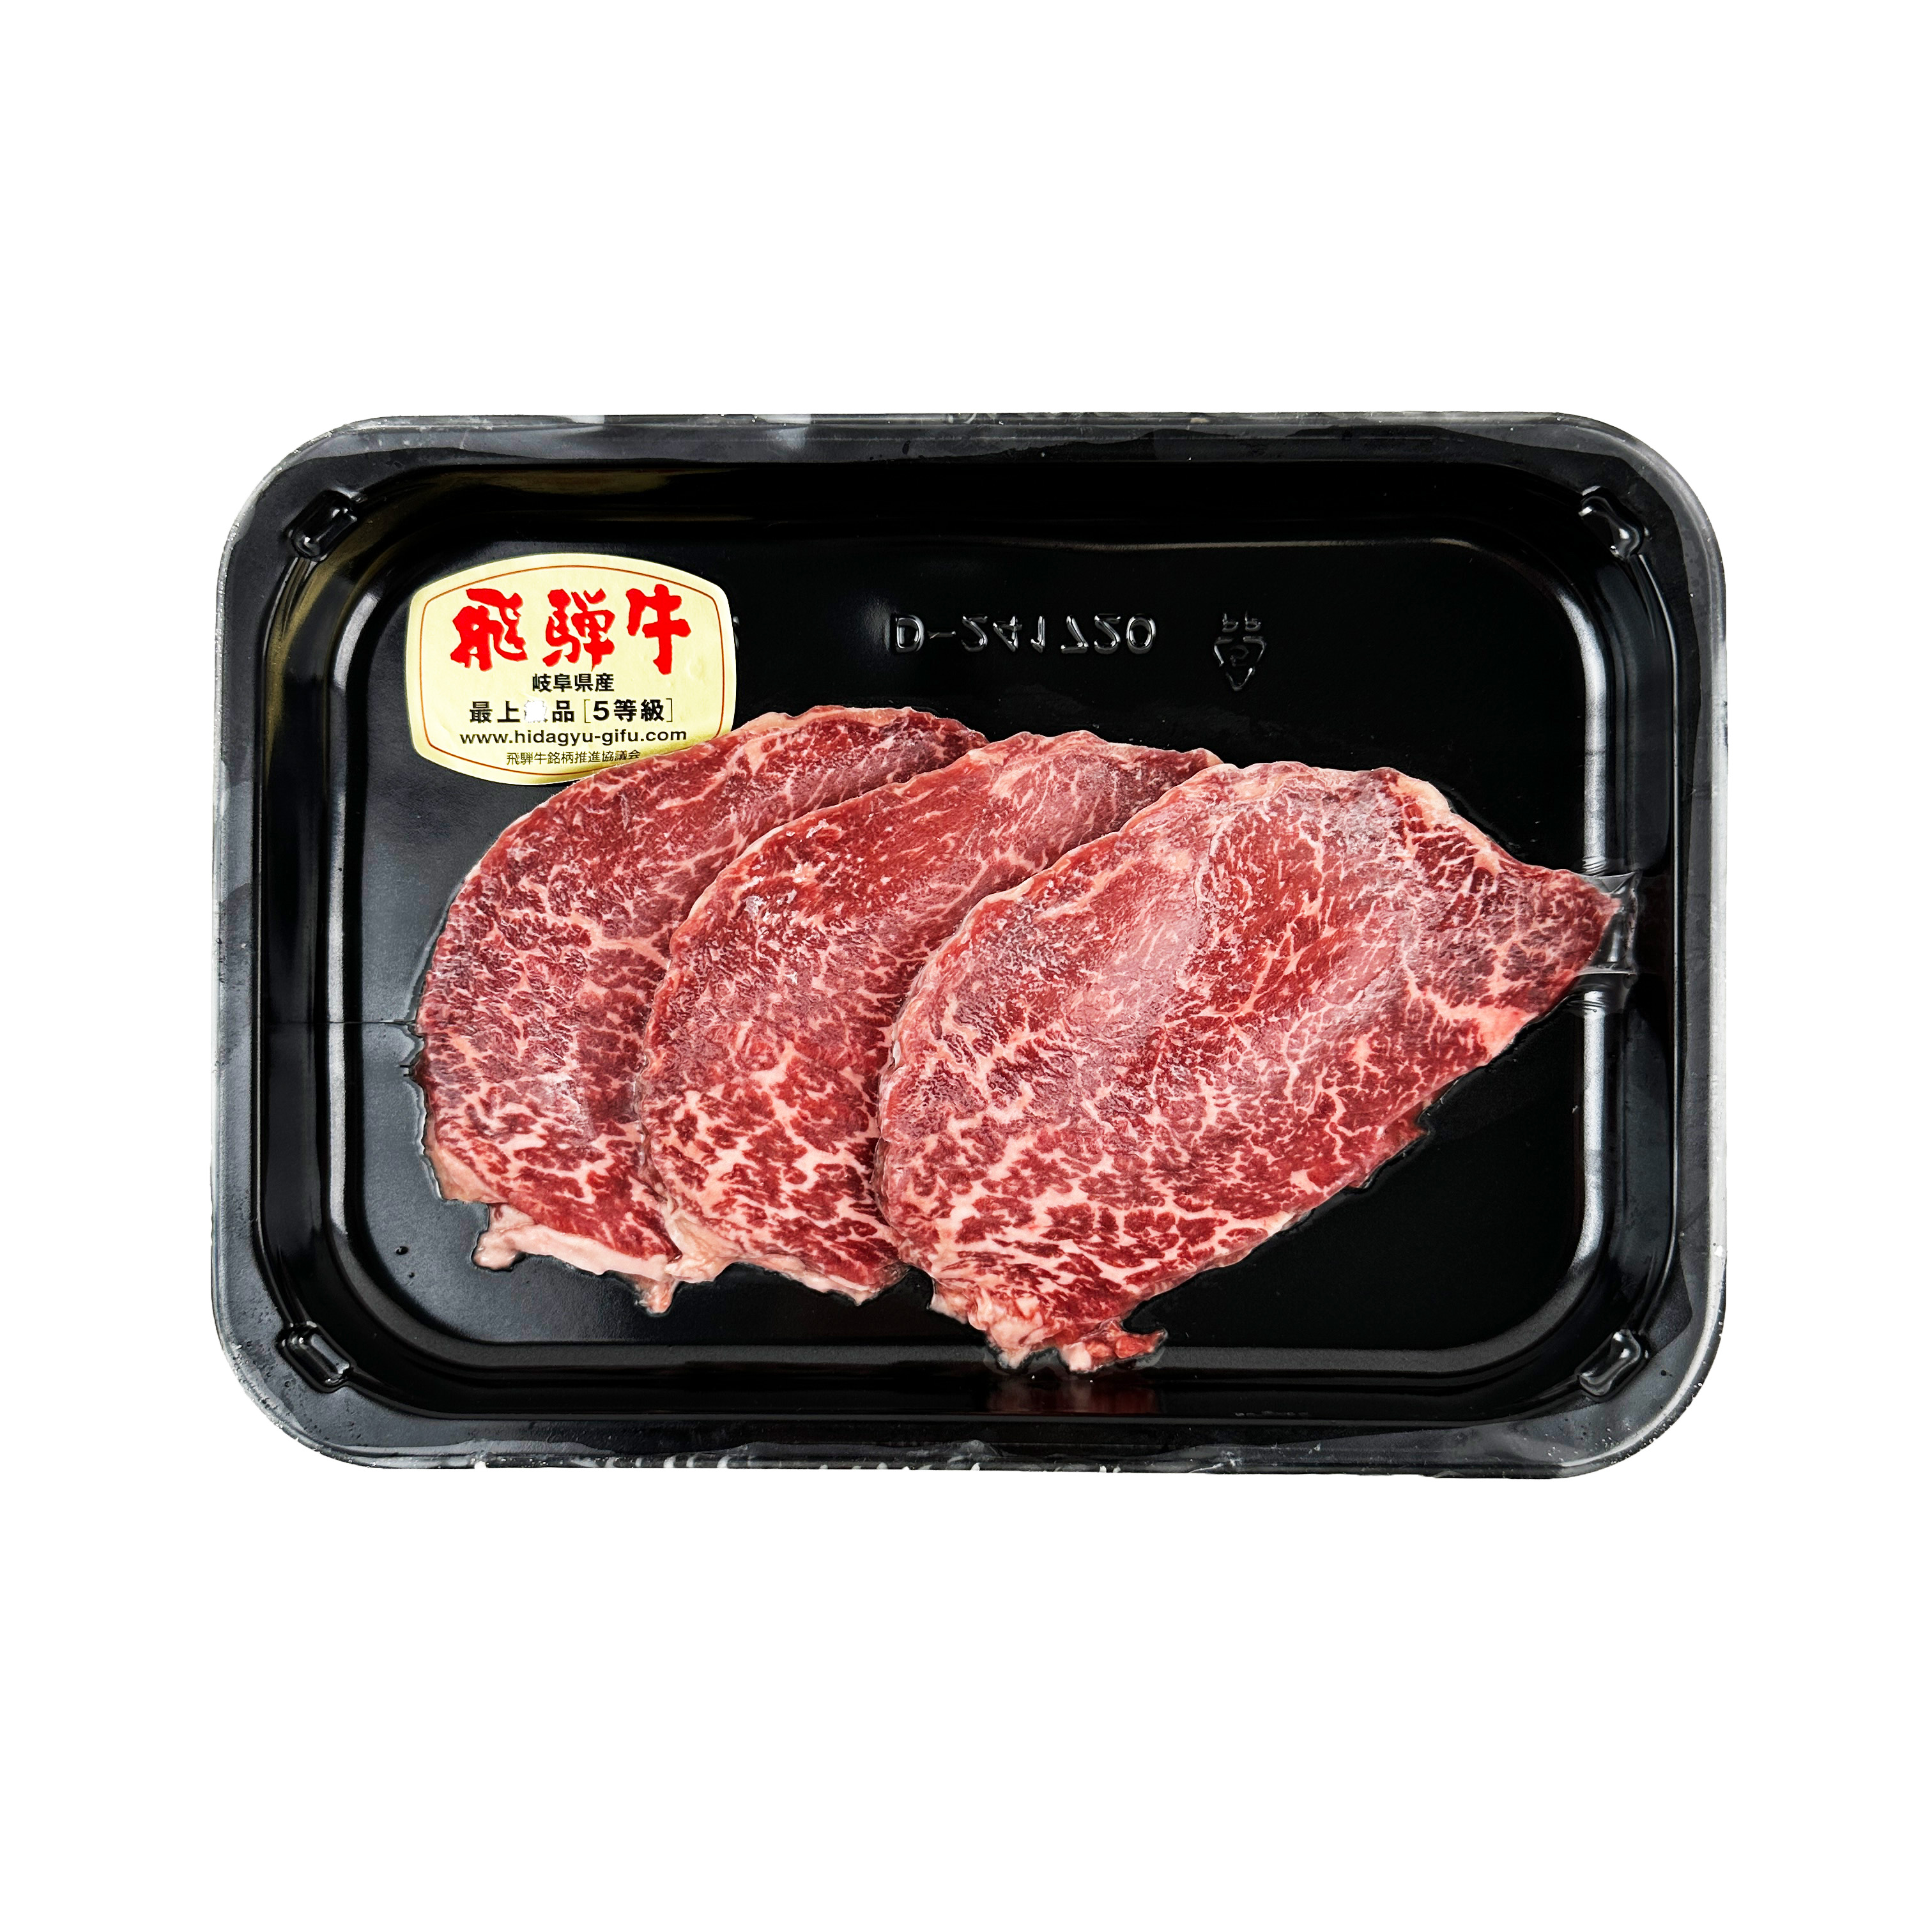 Karubi is a classical Japanese-style BBQ choice.-eBest-Beef,Meat deli & eggs